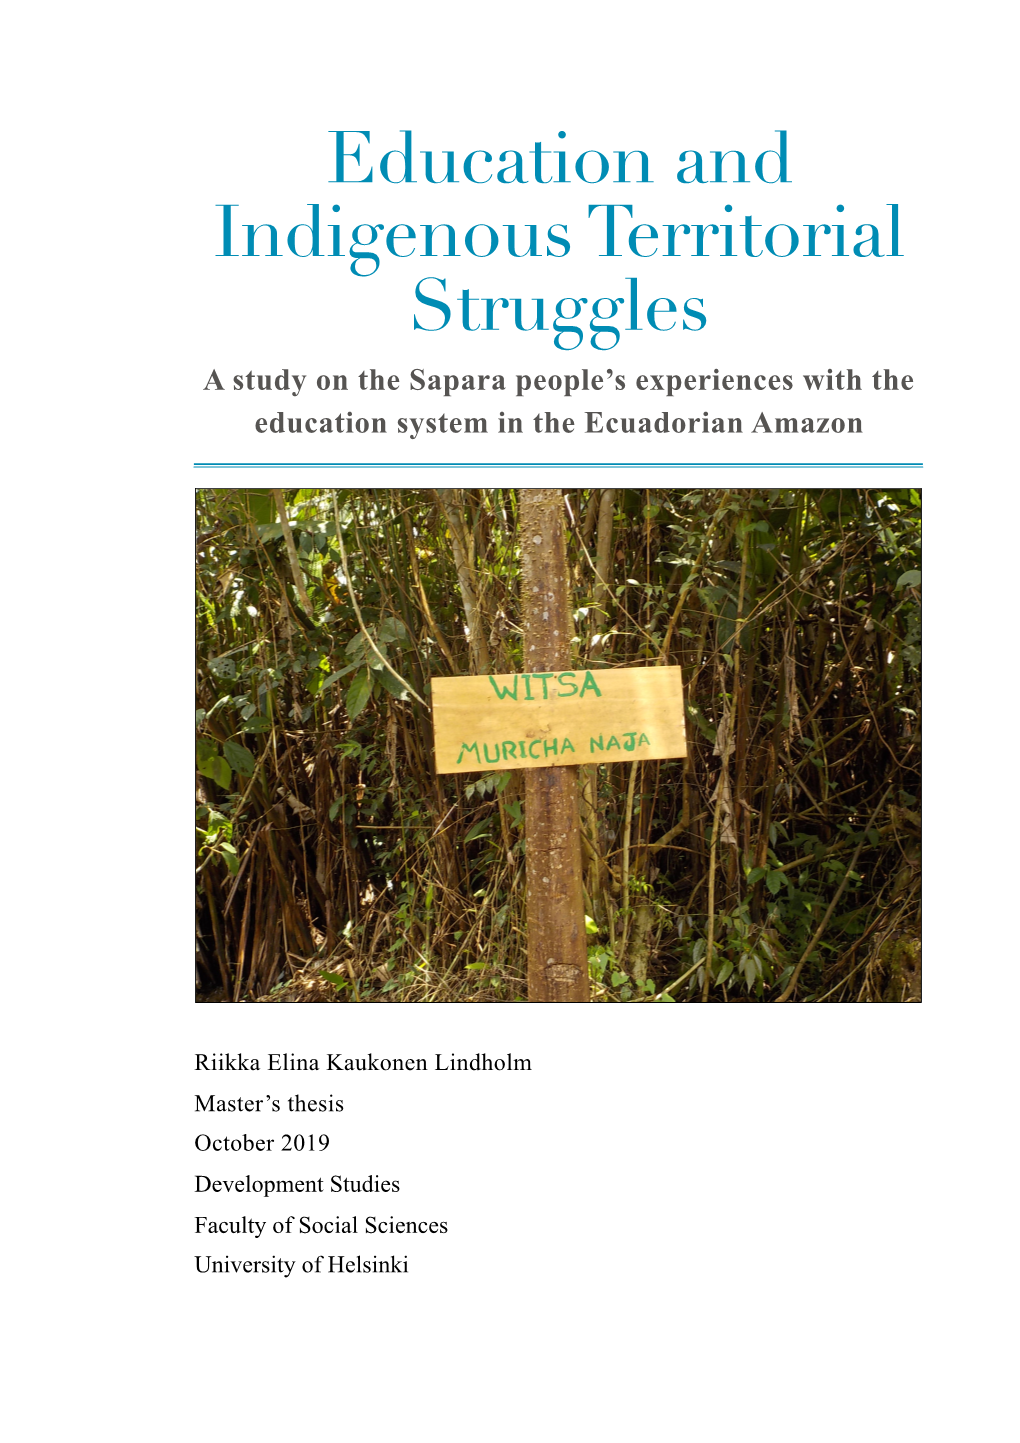 Education and Indigenous Territorial Struggles a Study on the Sapara People’S Experiences with the Education System in the Ecuadorian Amazon